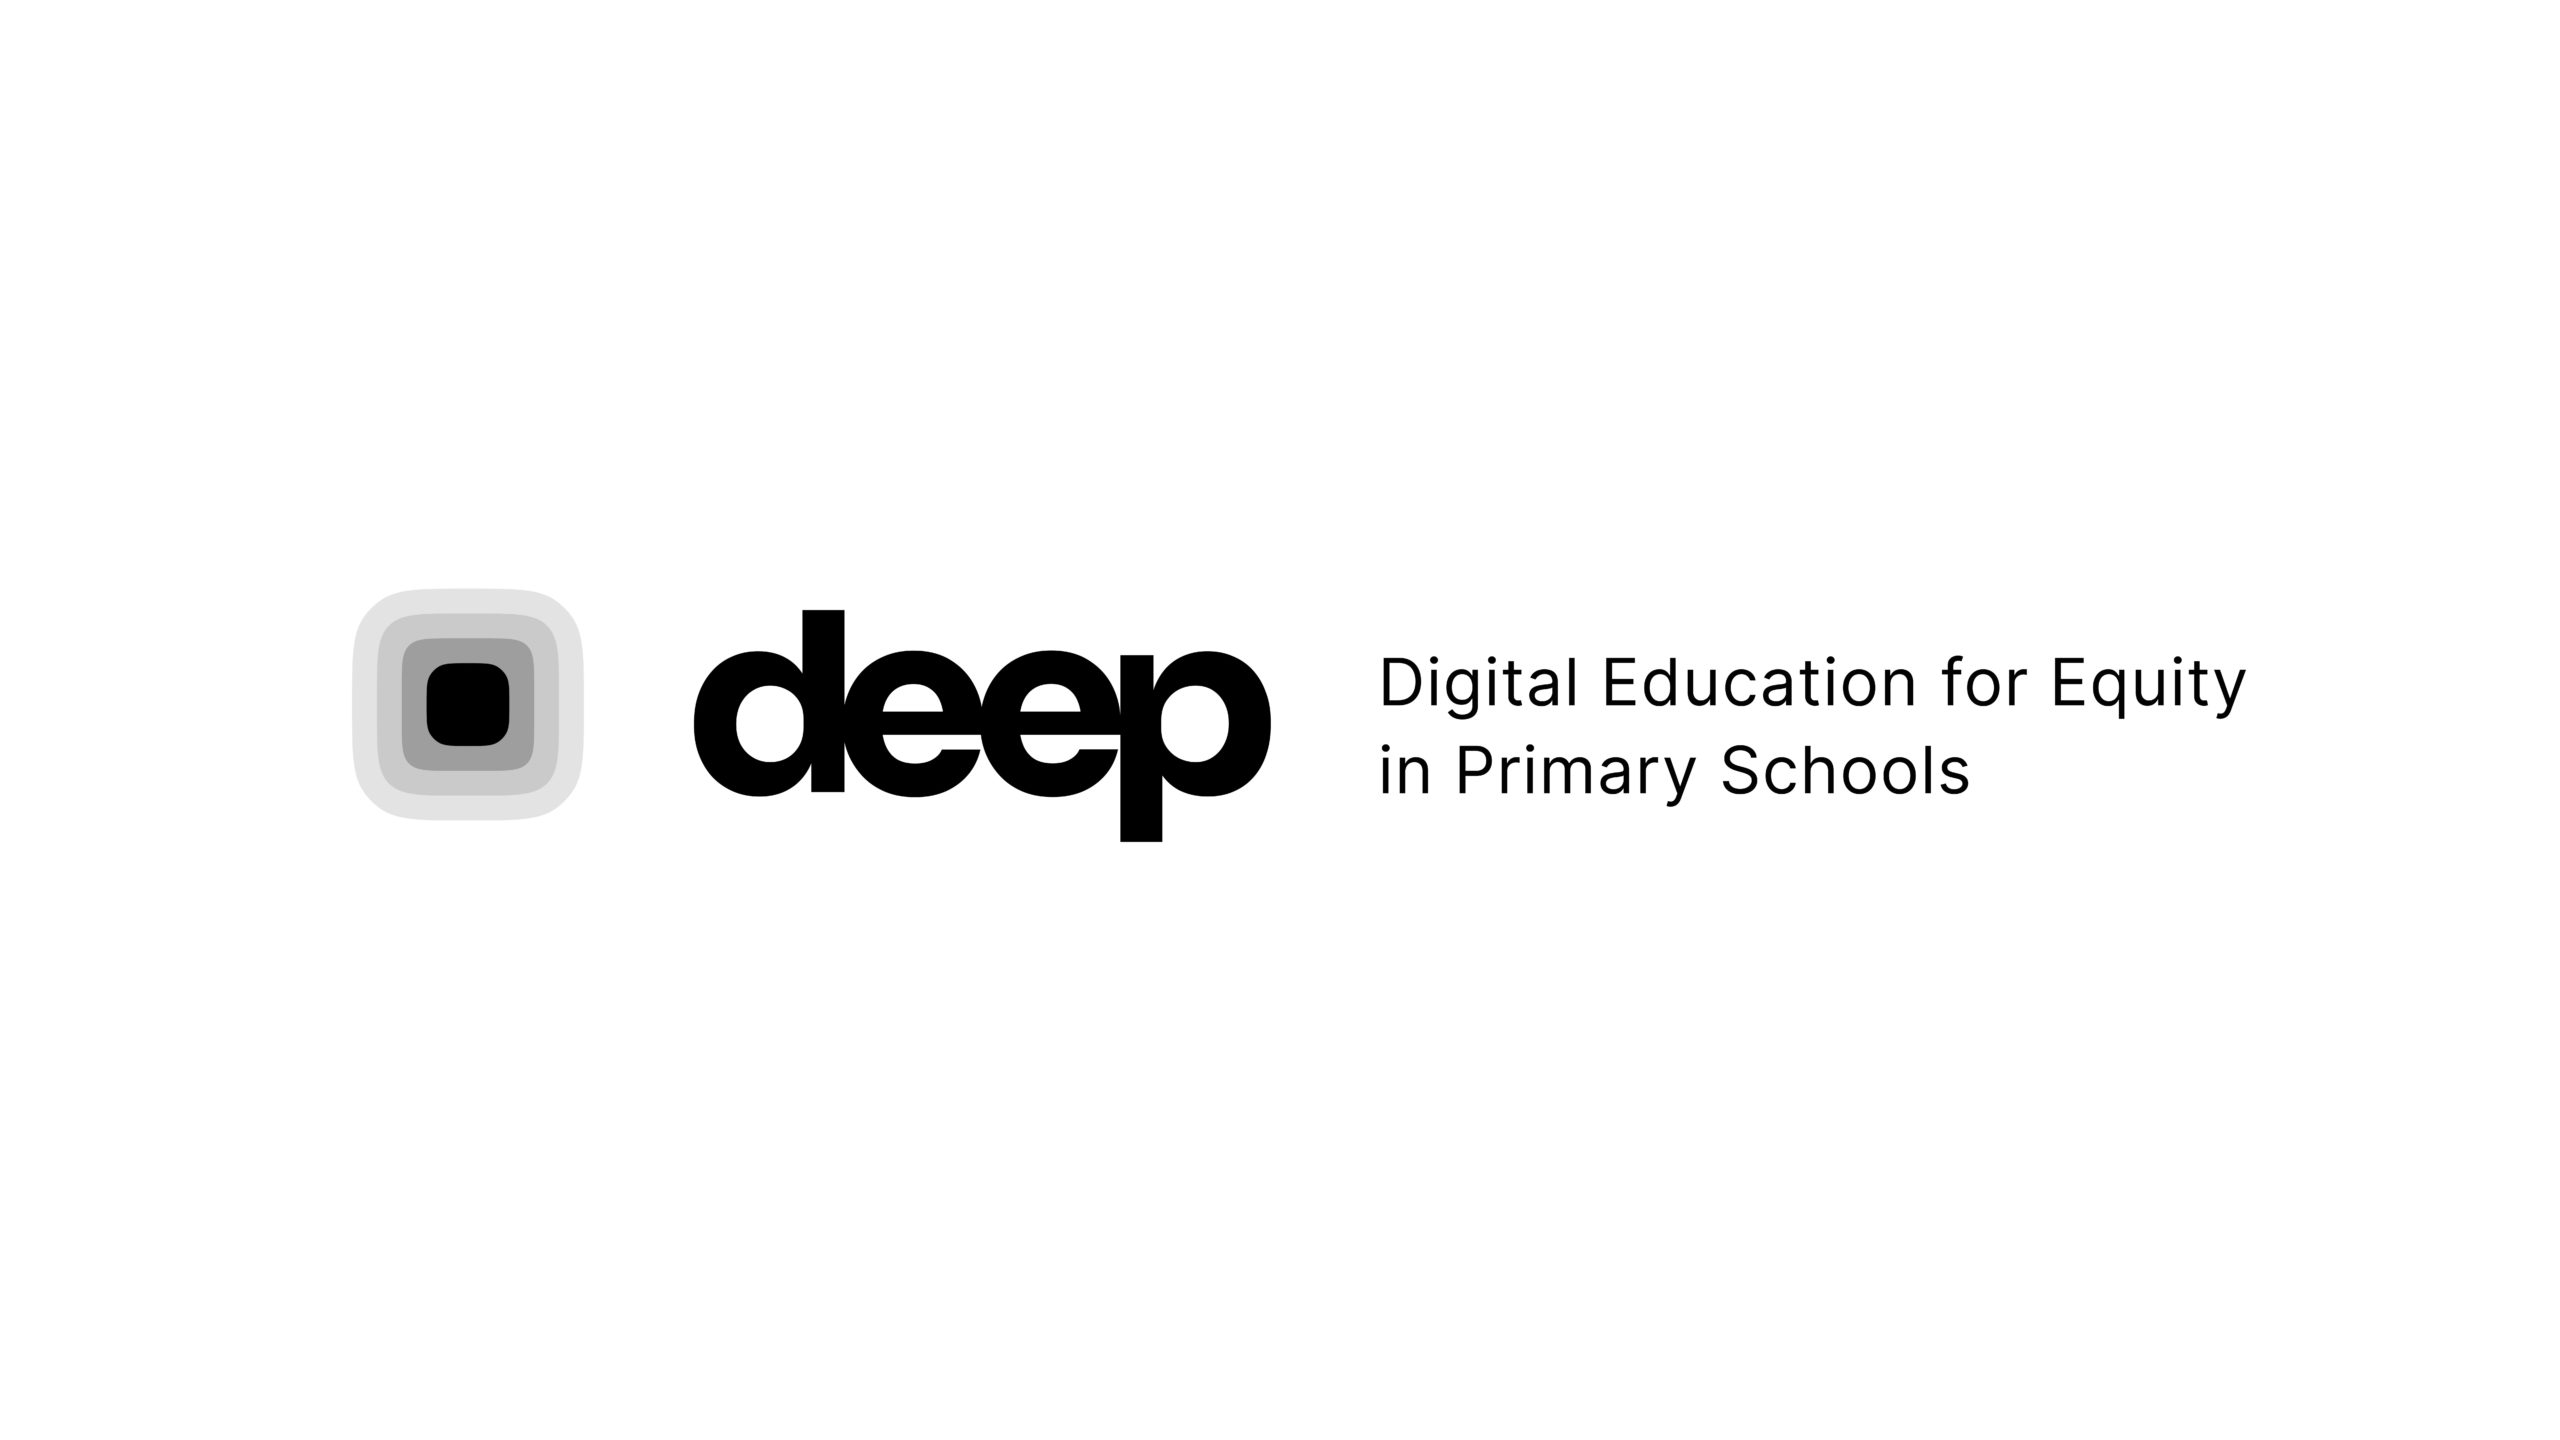 Digital Education for Equity in Primary Schools (DEEP)